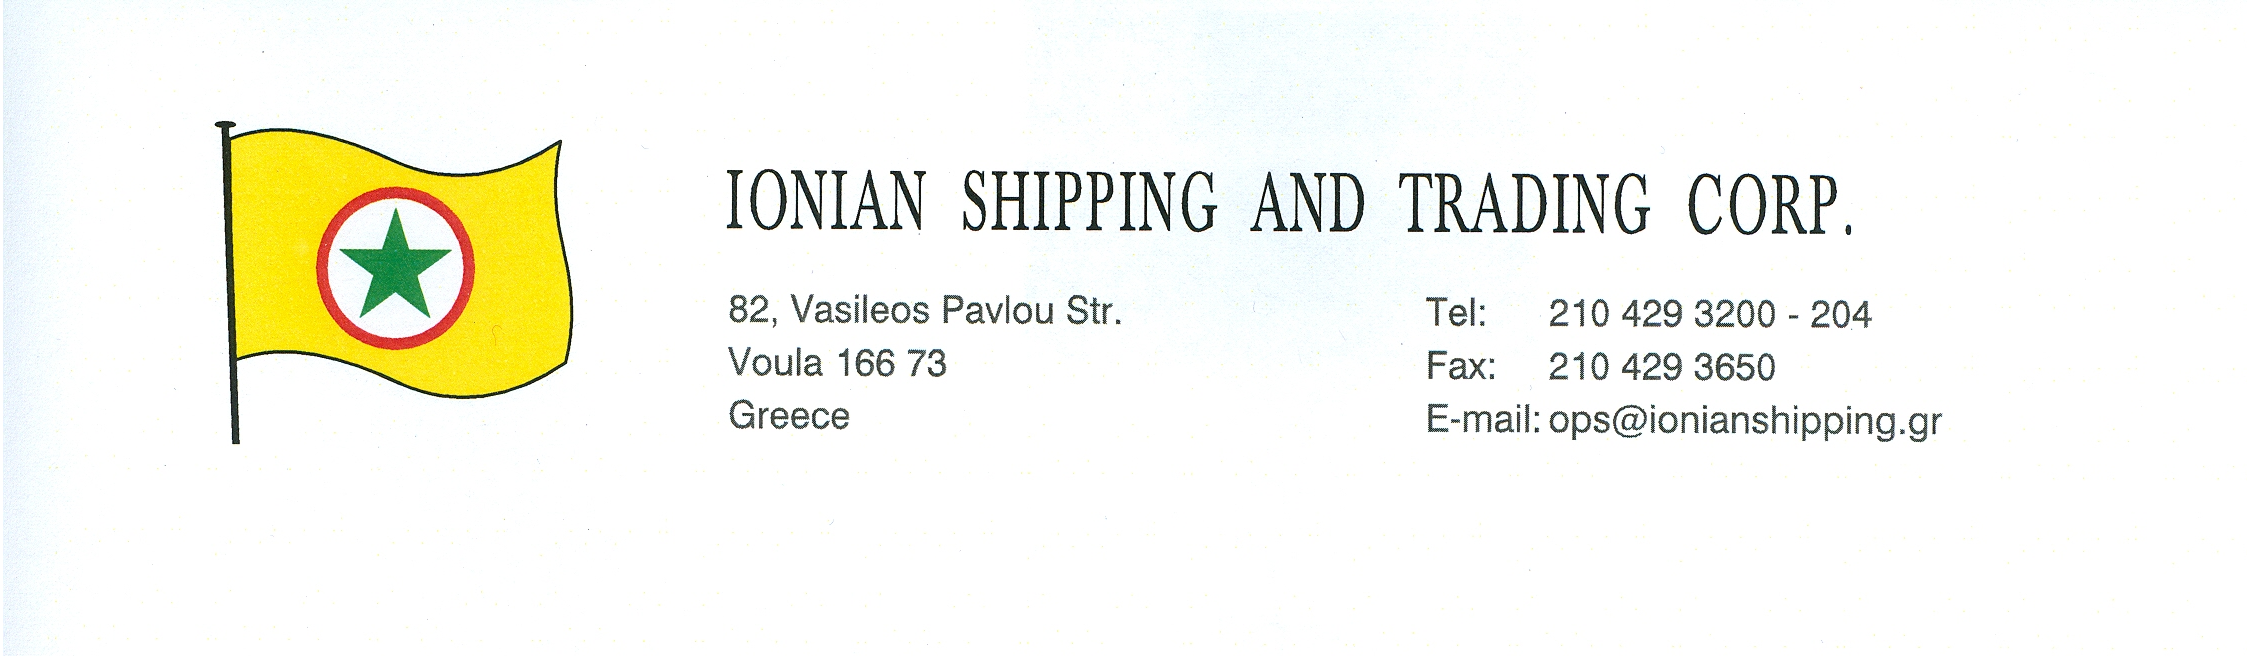 IONIAN SHIPPING AND TRADING CORP.